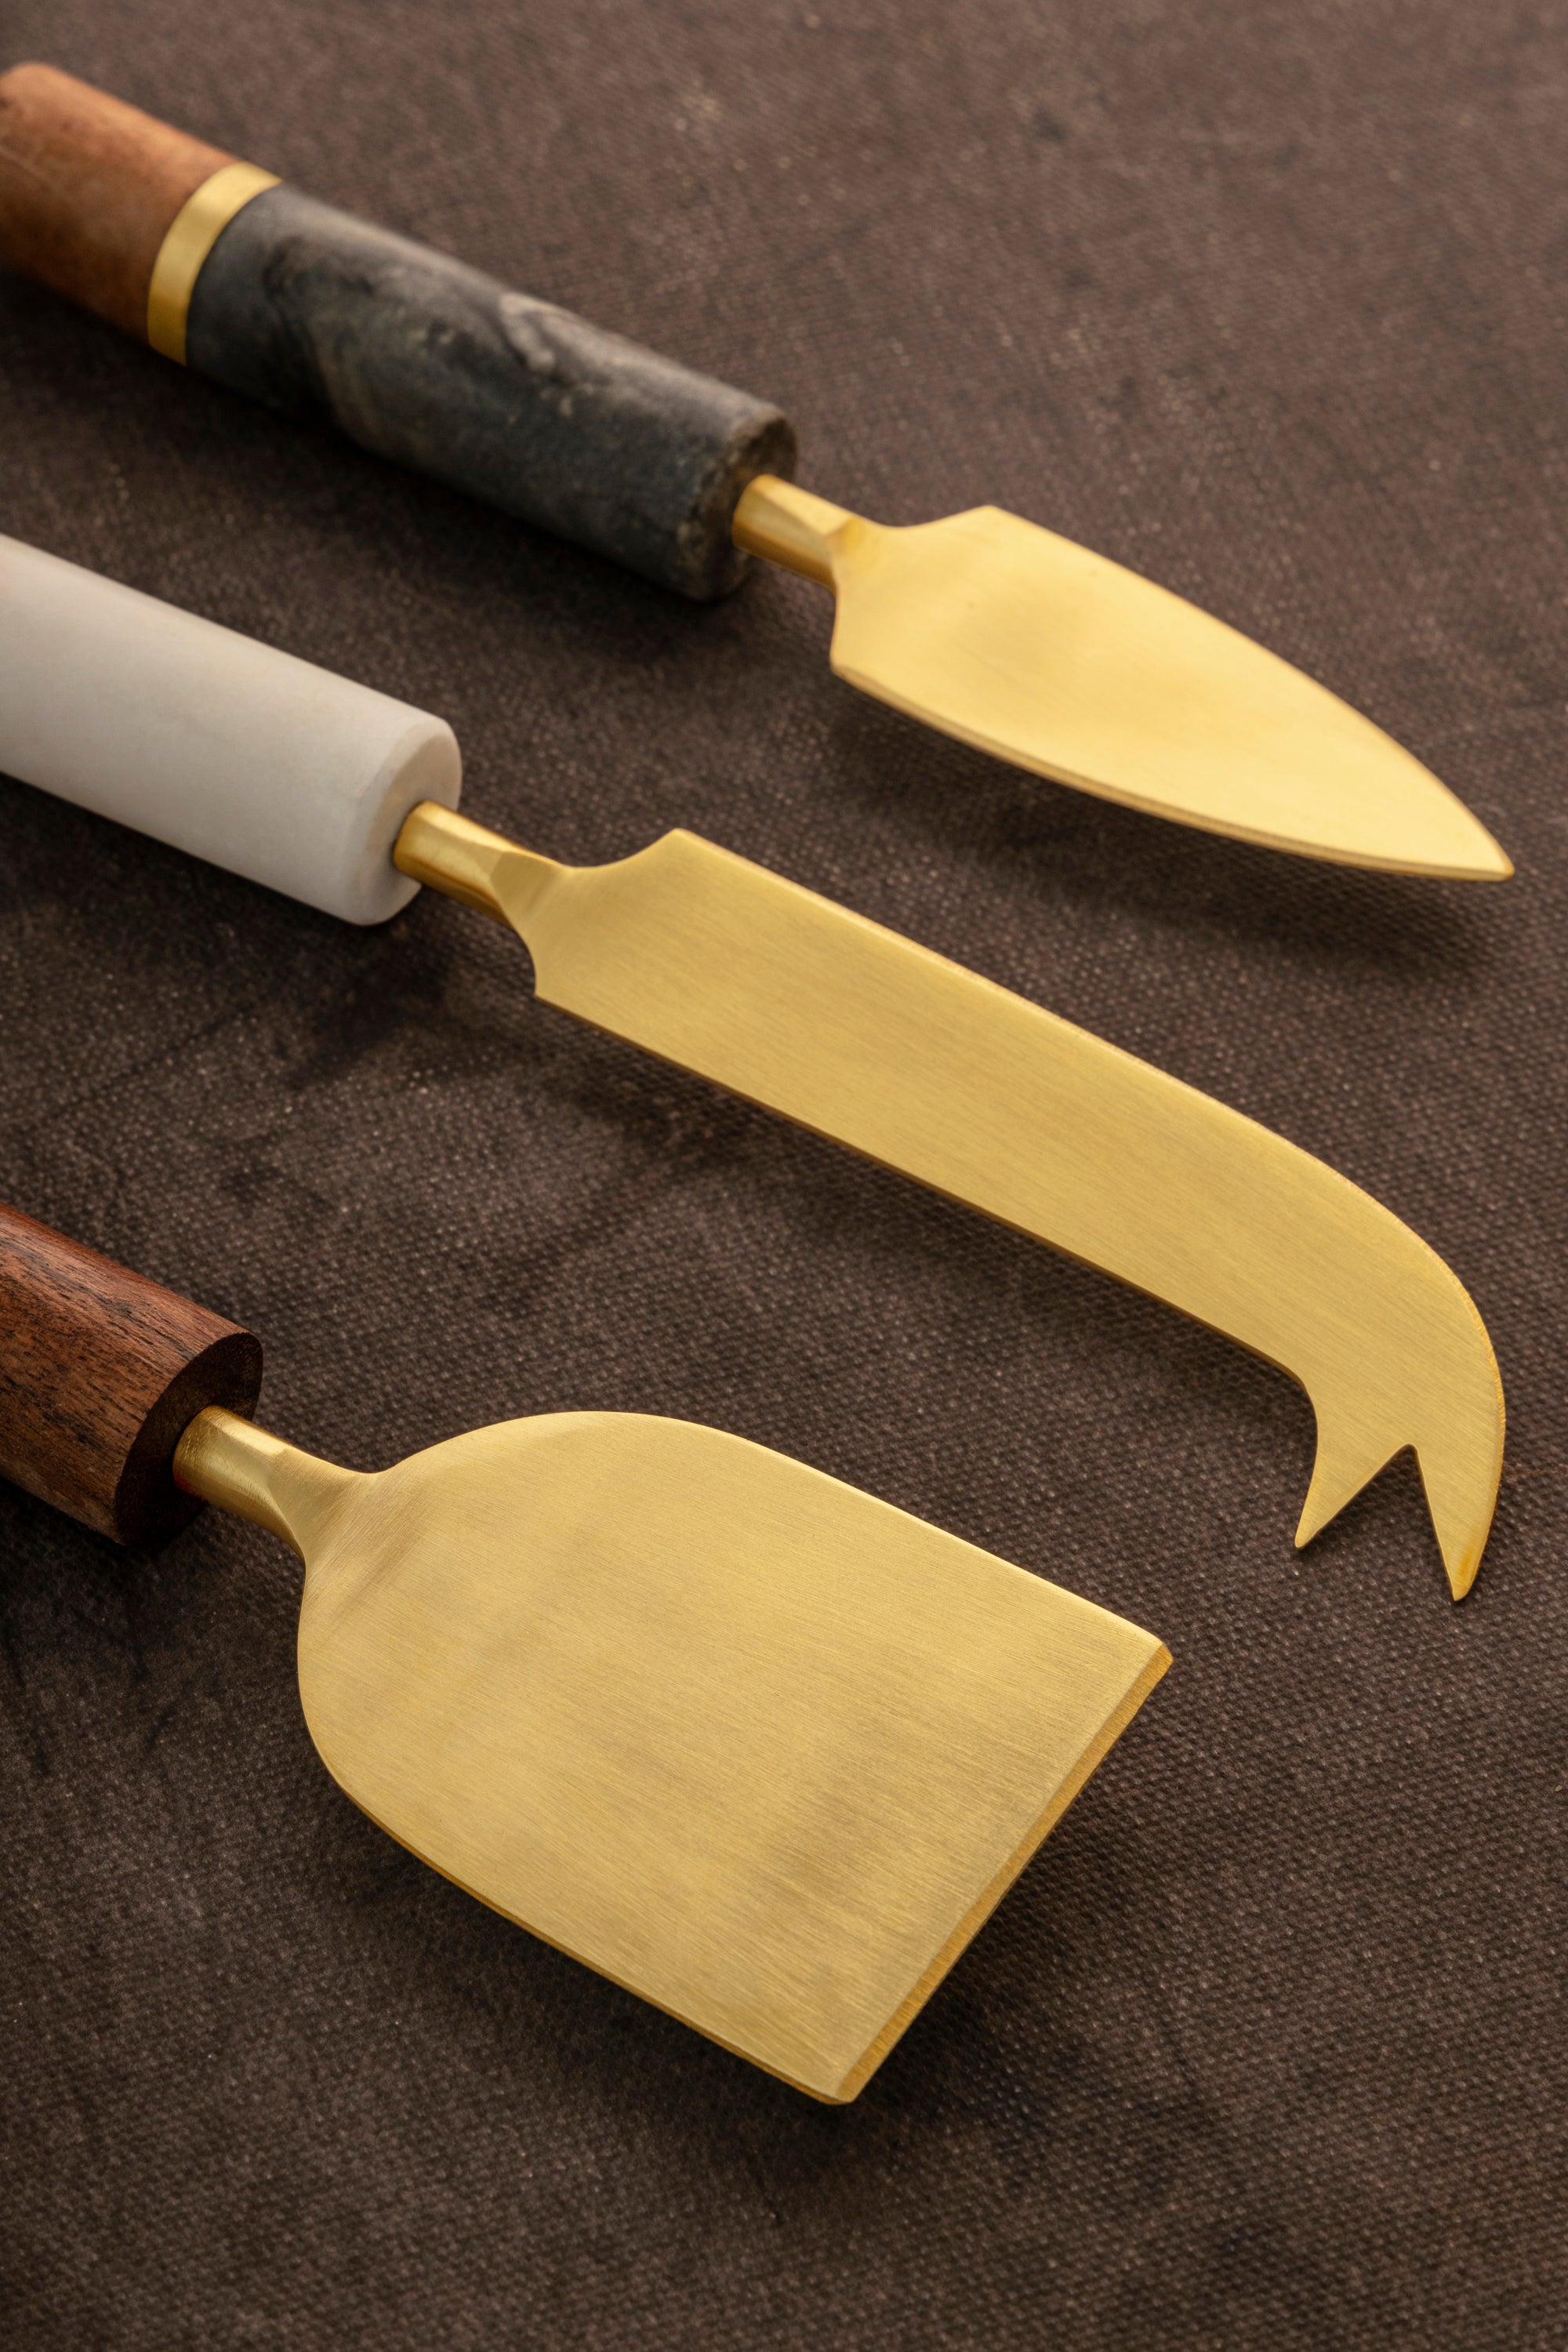 Exquisite 3-Piece Cheese Knives Set  With Marble and Wood handle